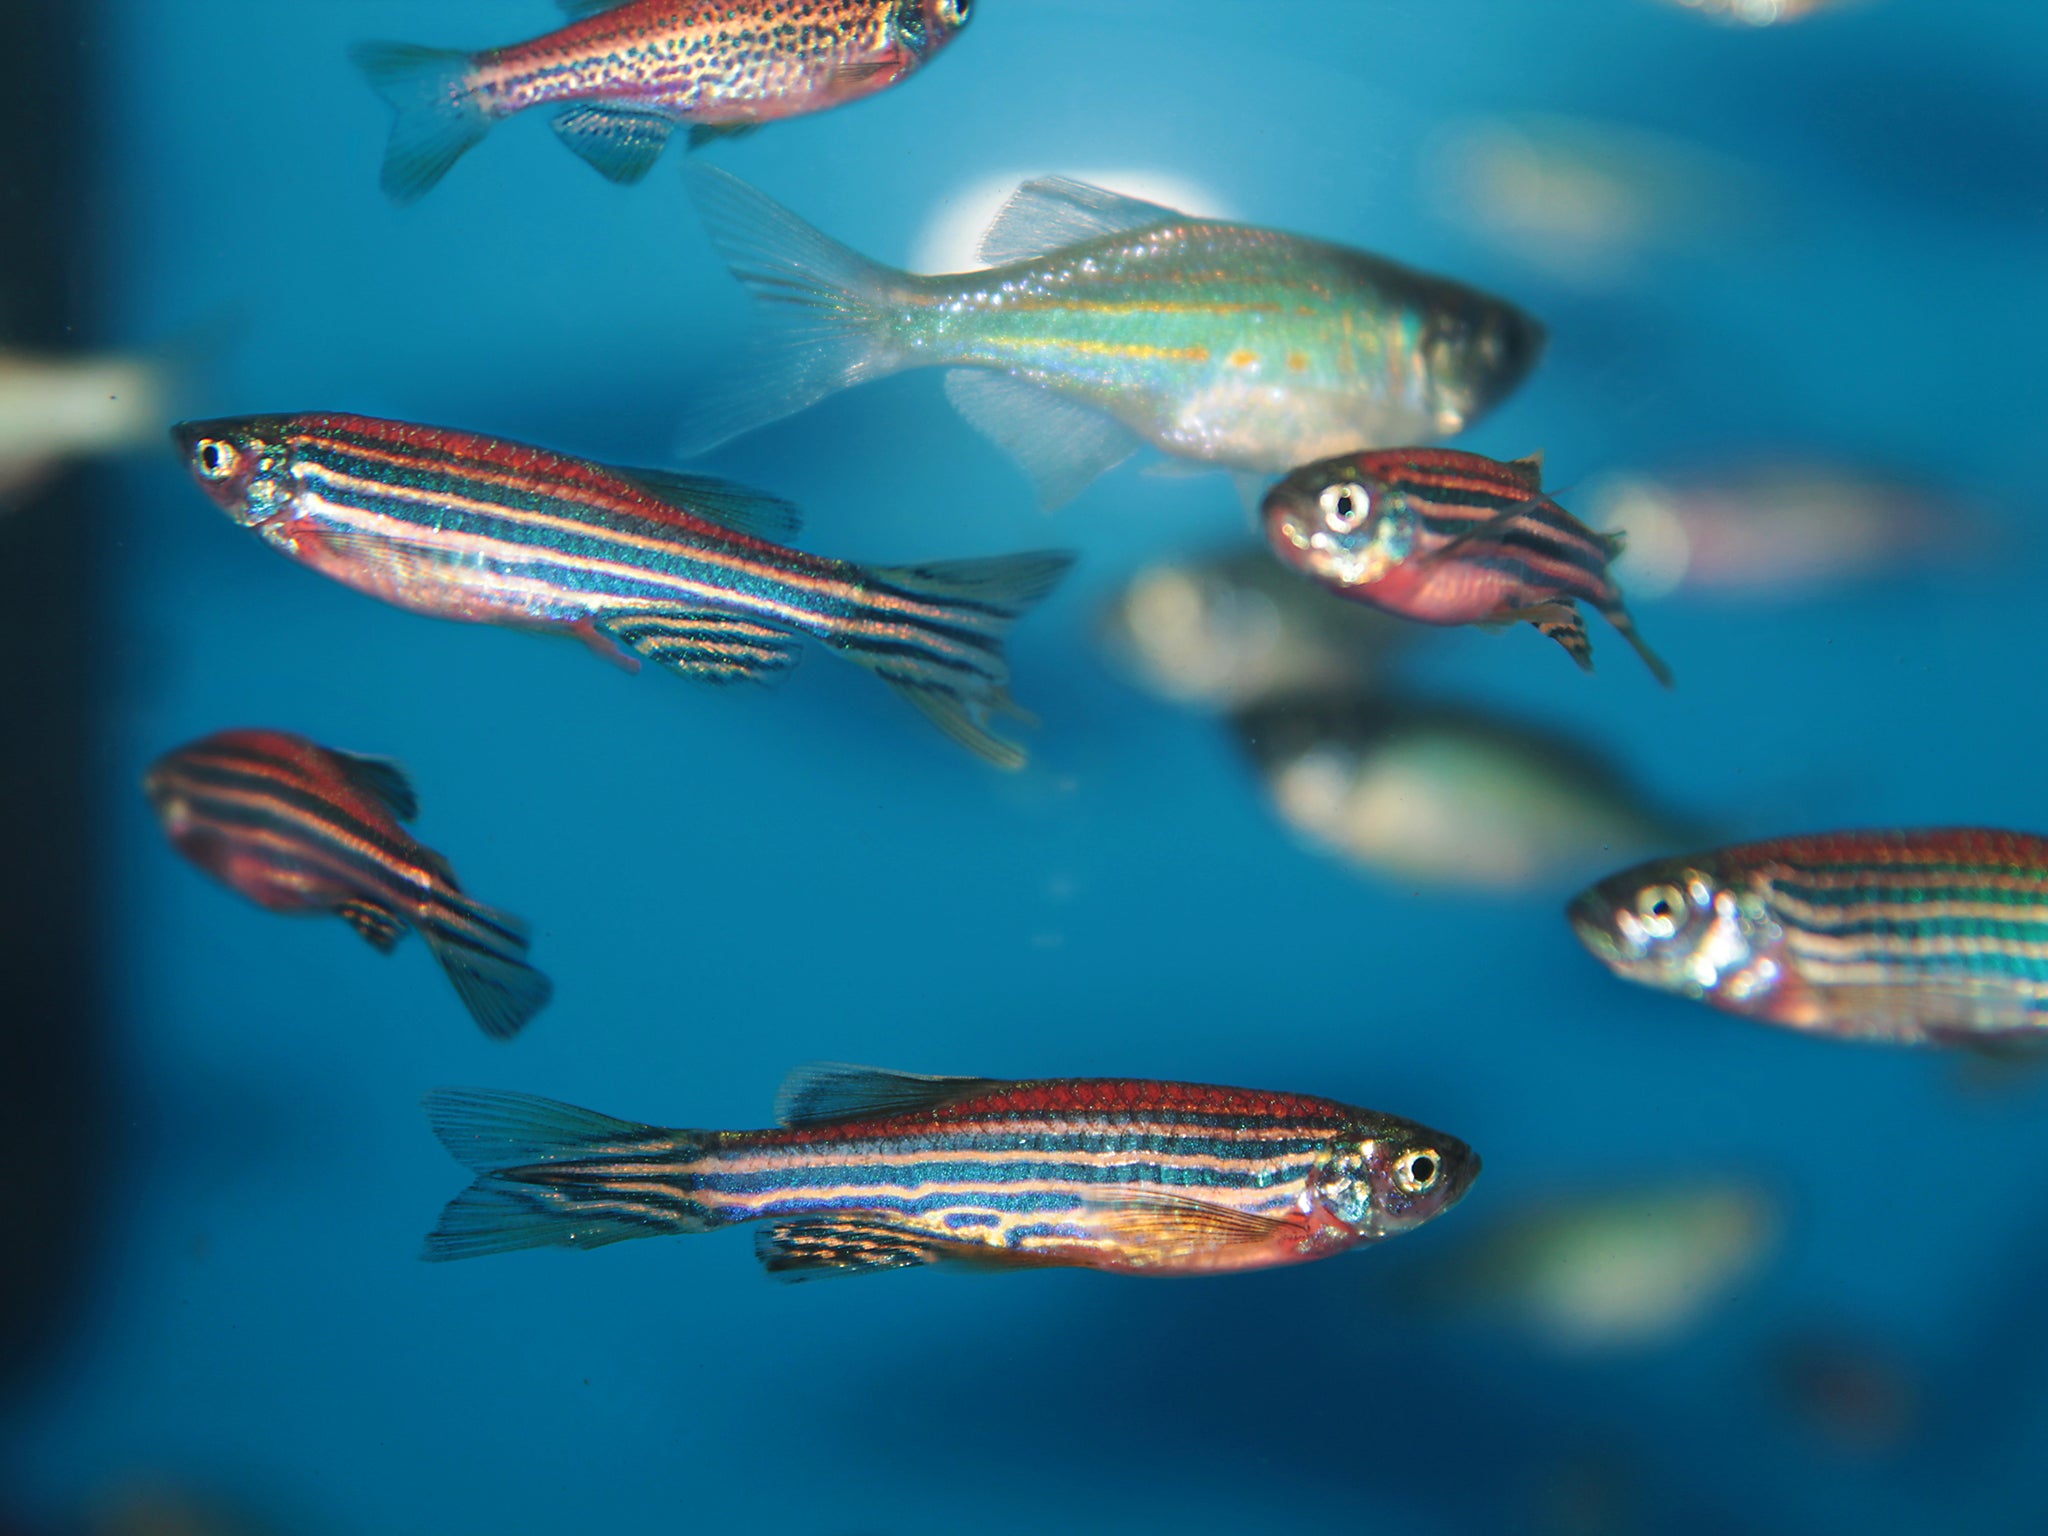 Zebrafish are less scared of danger when they are in a group